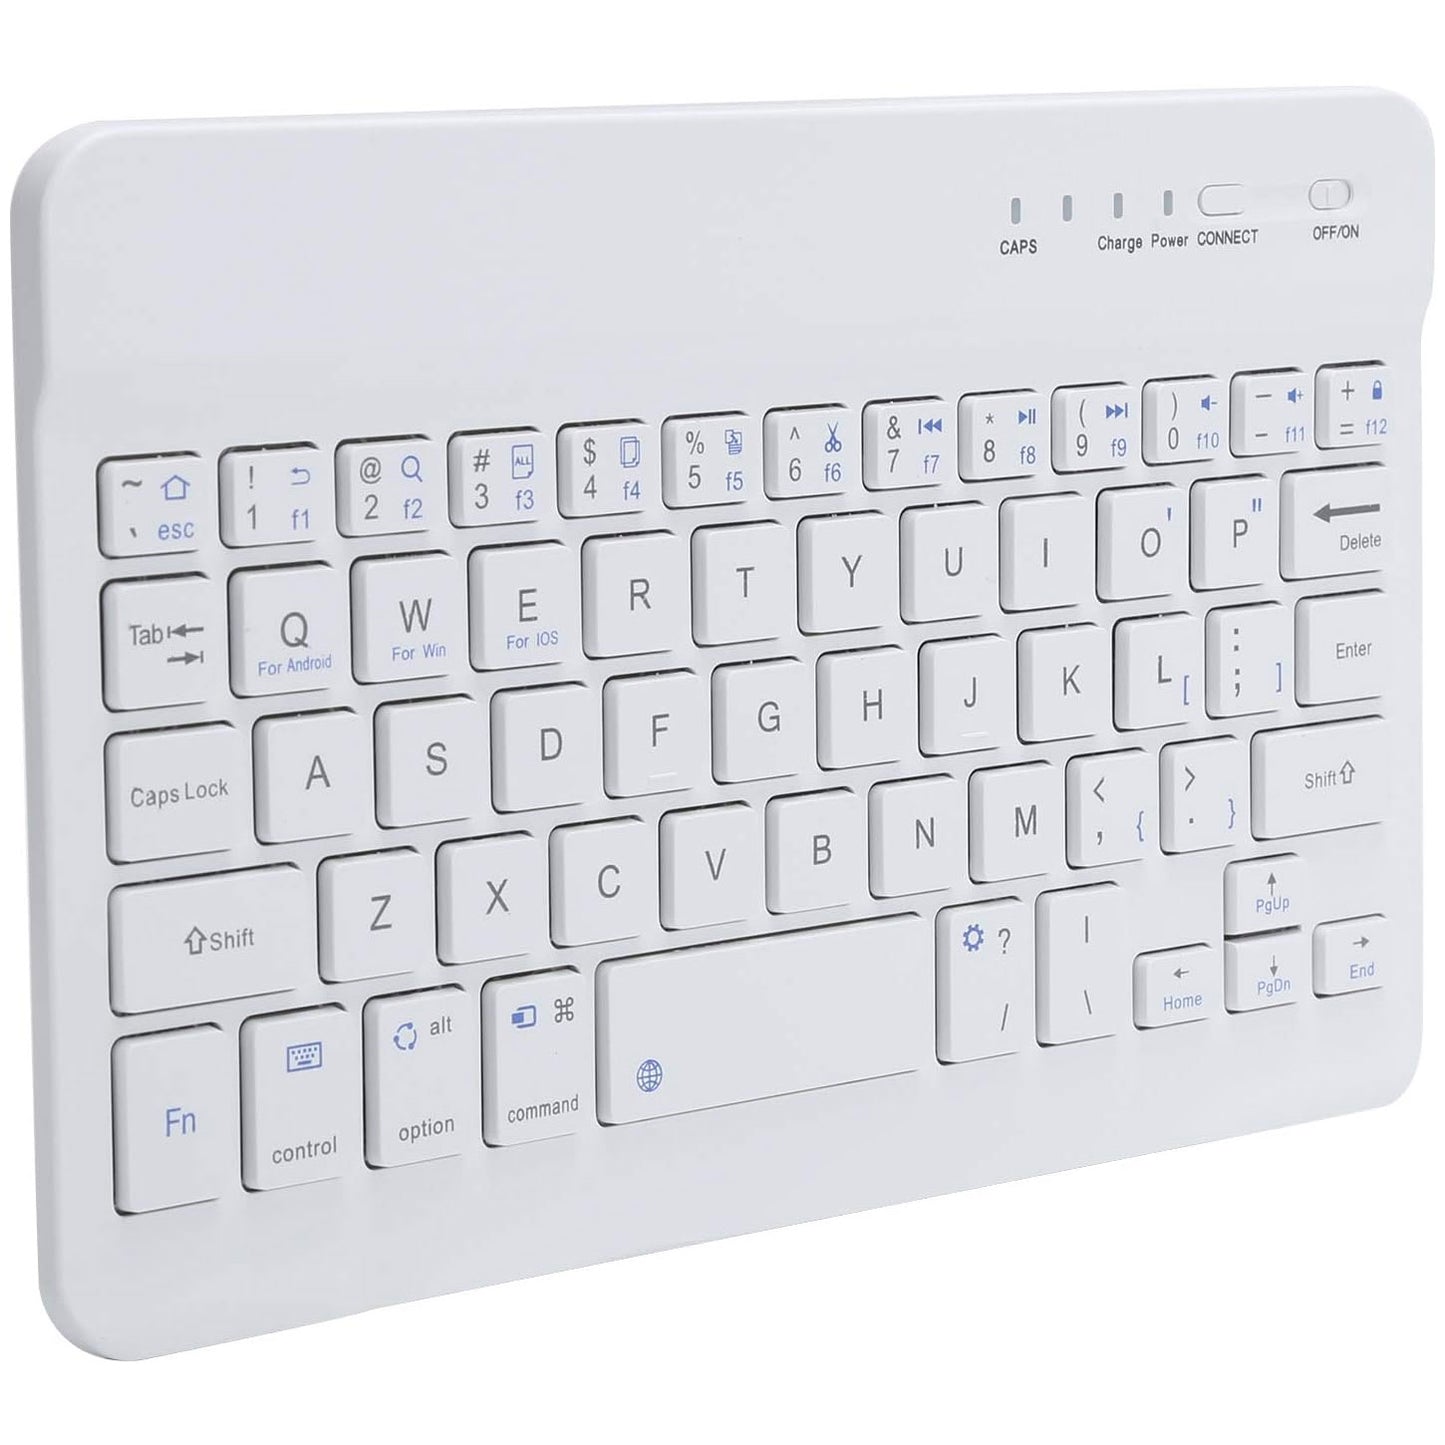  Wireless Keyboard   Ultra Slim   Rechargeable  Portable Compact  - ONS79 2053-1